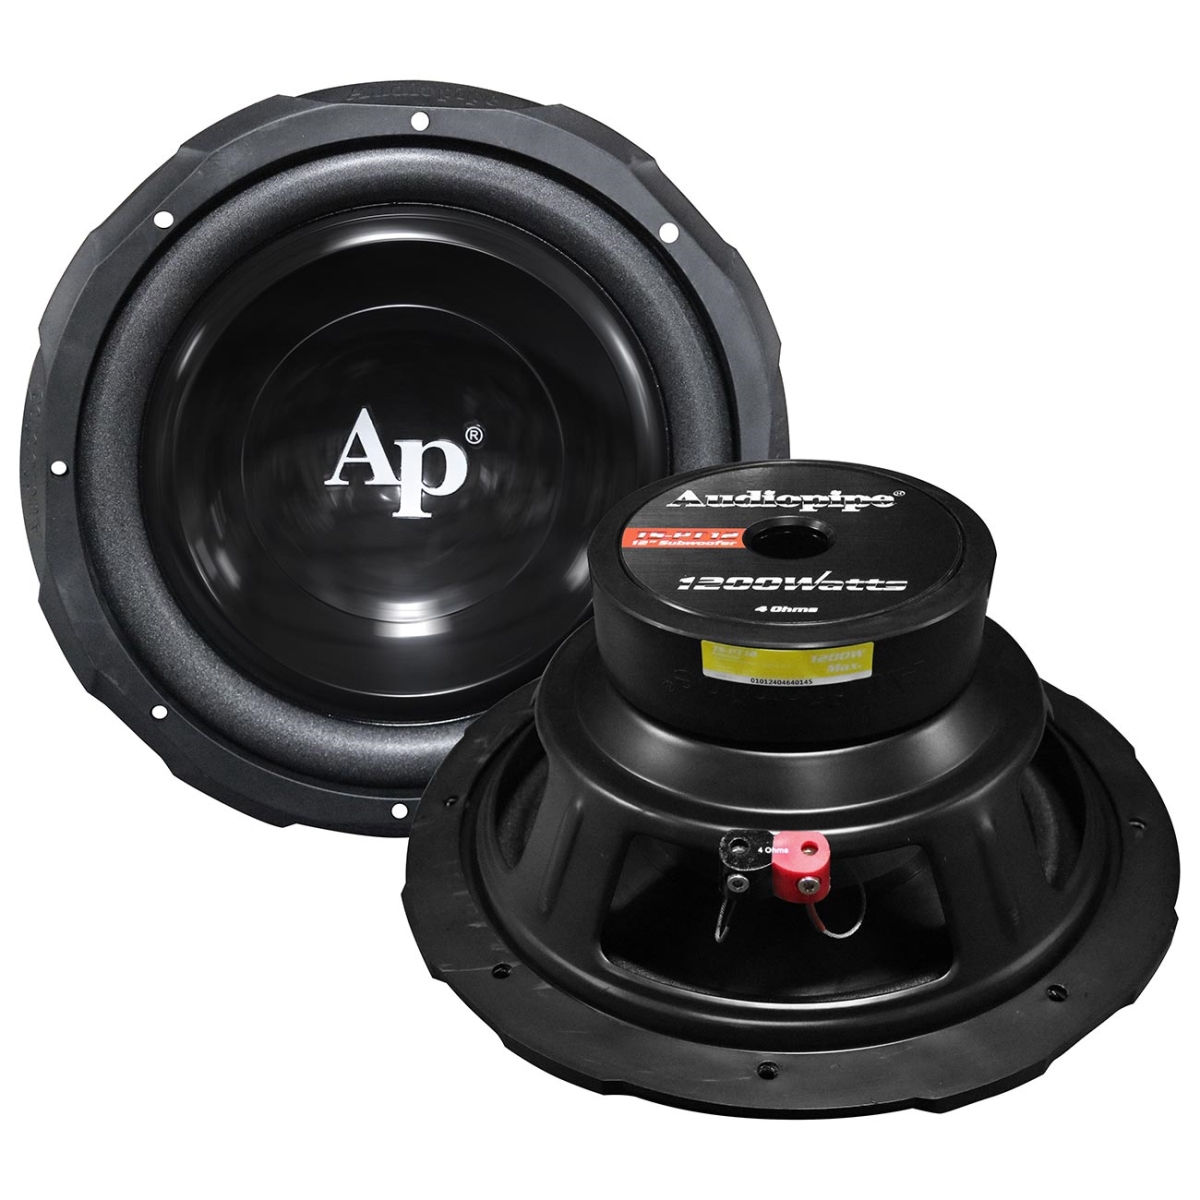 Picture of Audiopipe TSPT12 12 in. Woofer with Infinite Baffle 600W RMS & 1200W Max Single 4 Ohm Voice Coil